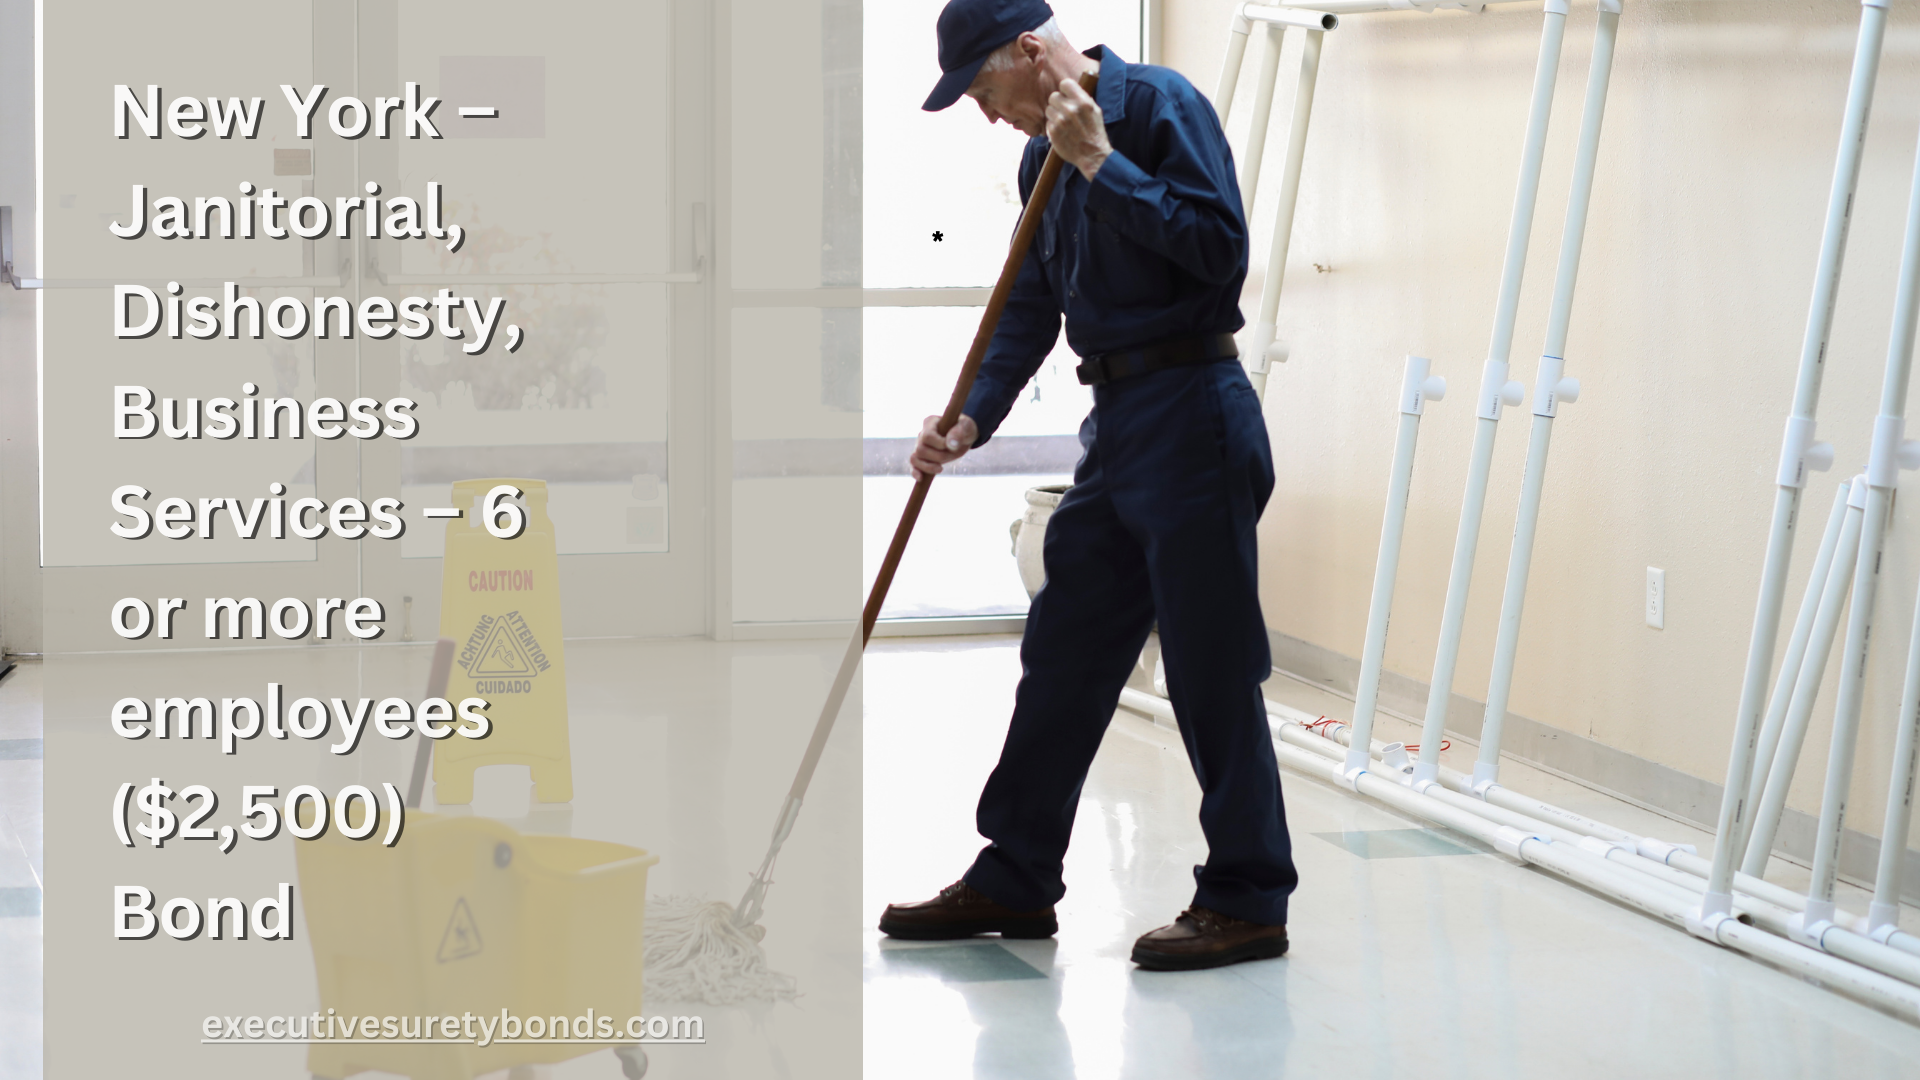 New York – Janitorial, Dishonesty, Business Services – 6 or more employees ($2,500) Bond